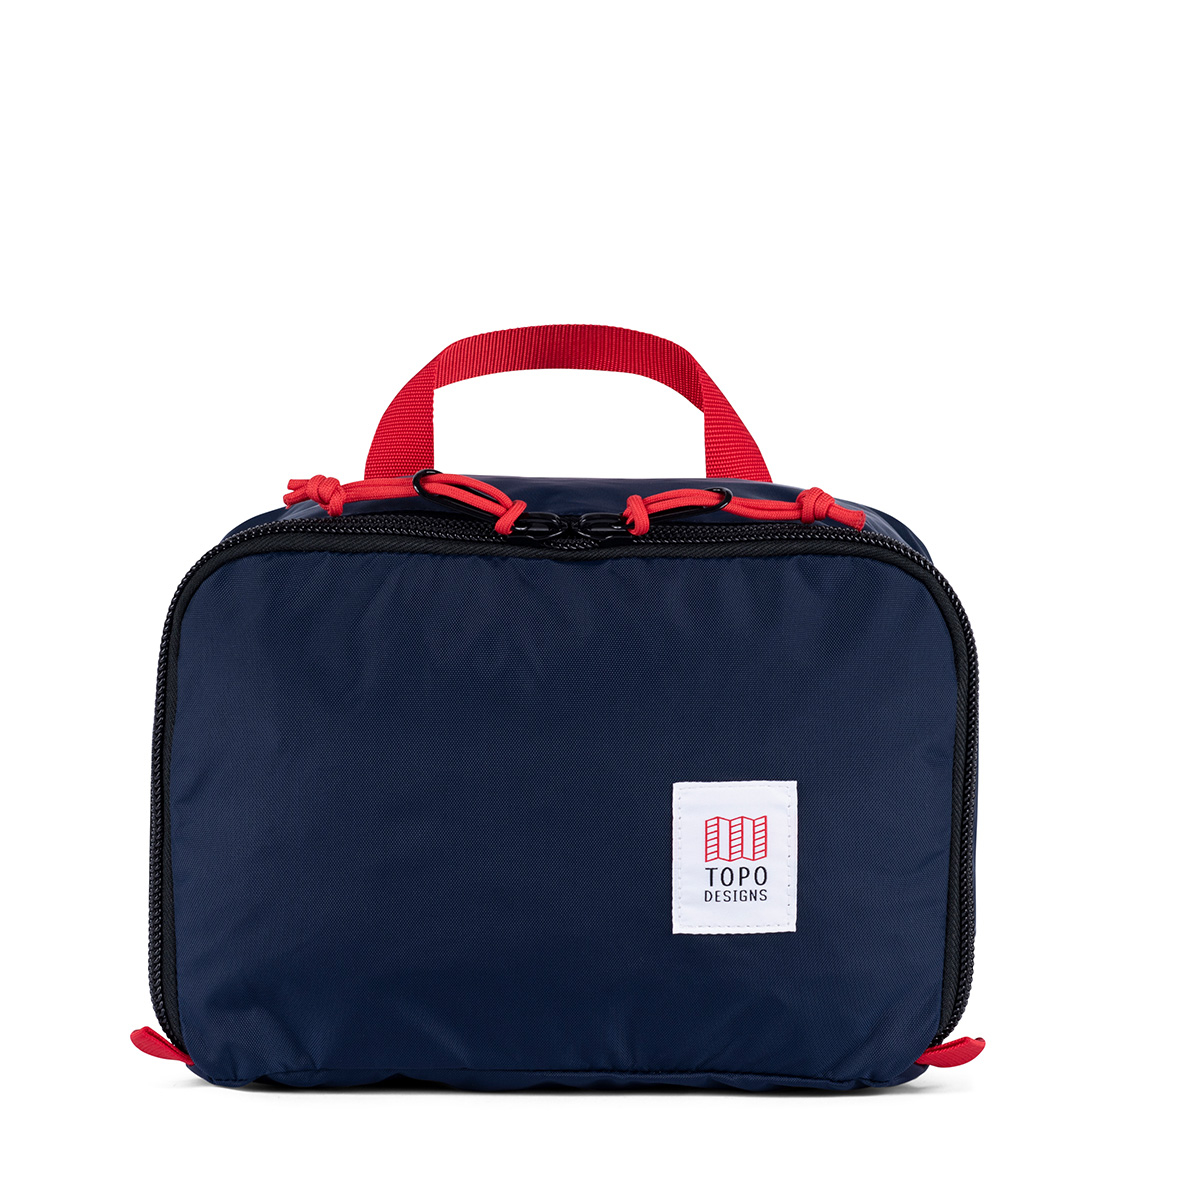 Topo Designs Pack Bag 10L Cube Navy, a simple, durable and highly functional way to organize your luggage